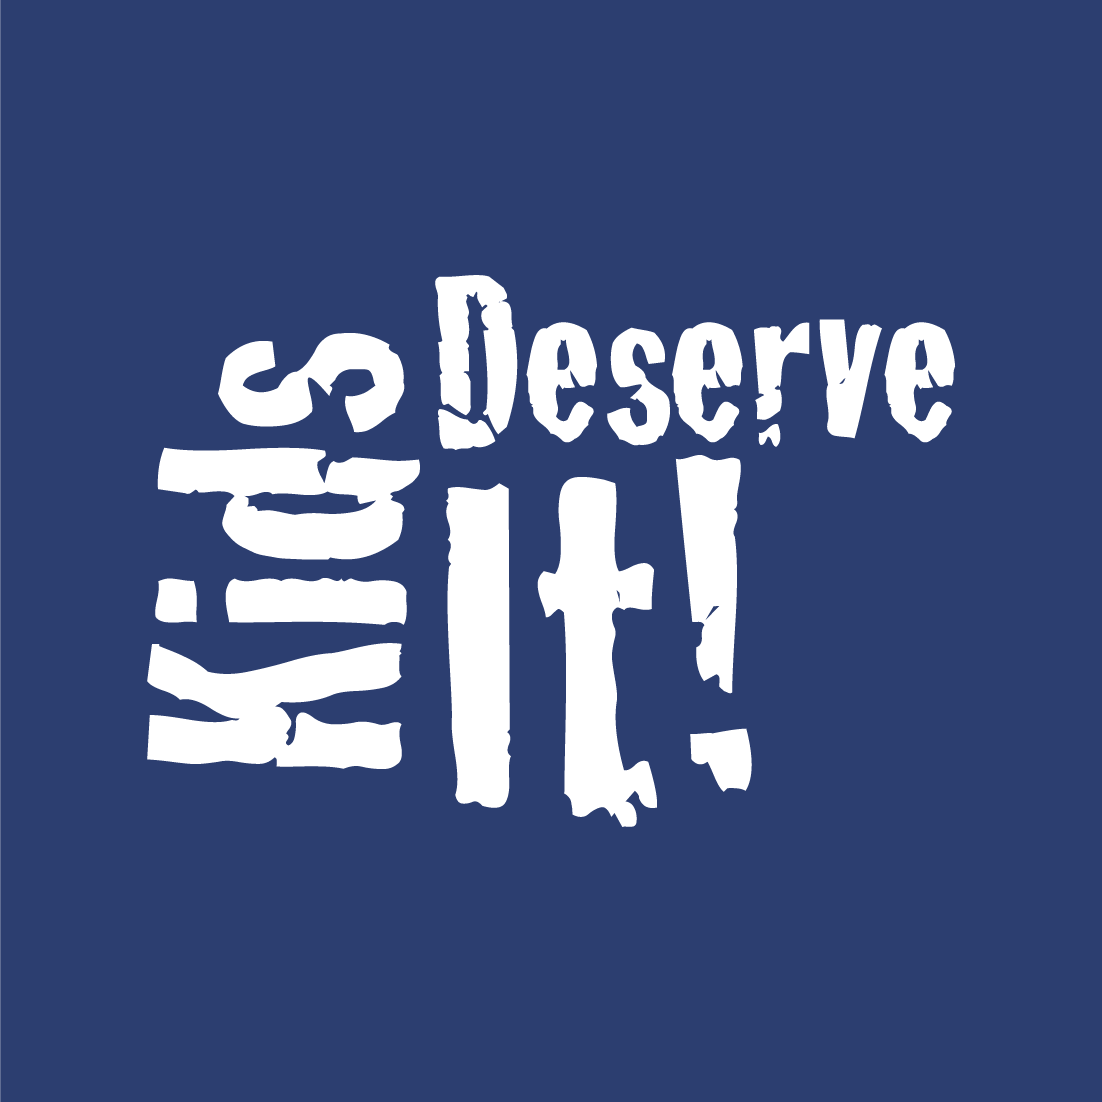 Kids Deserve It! (New Colors & Shirt Style!) shirt design - zoomed